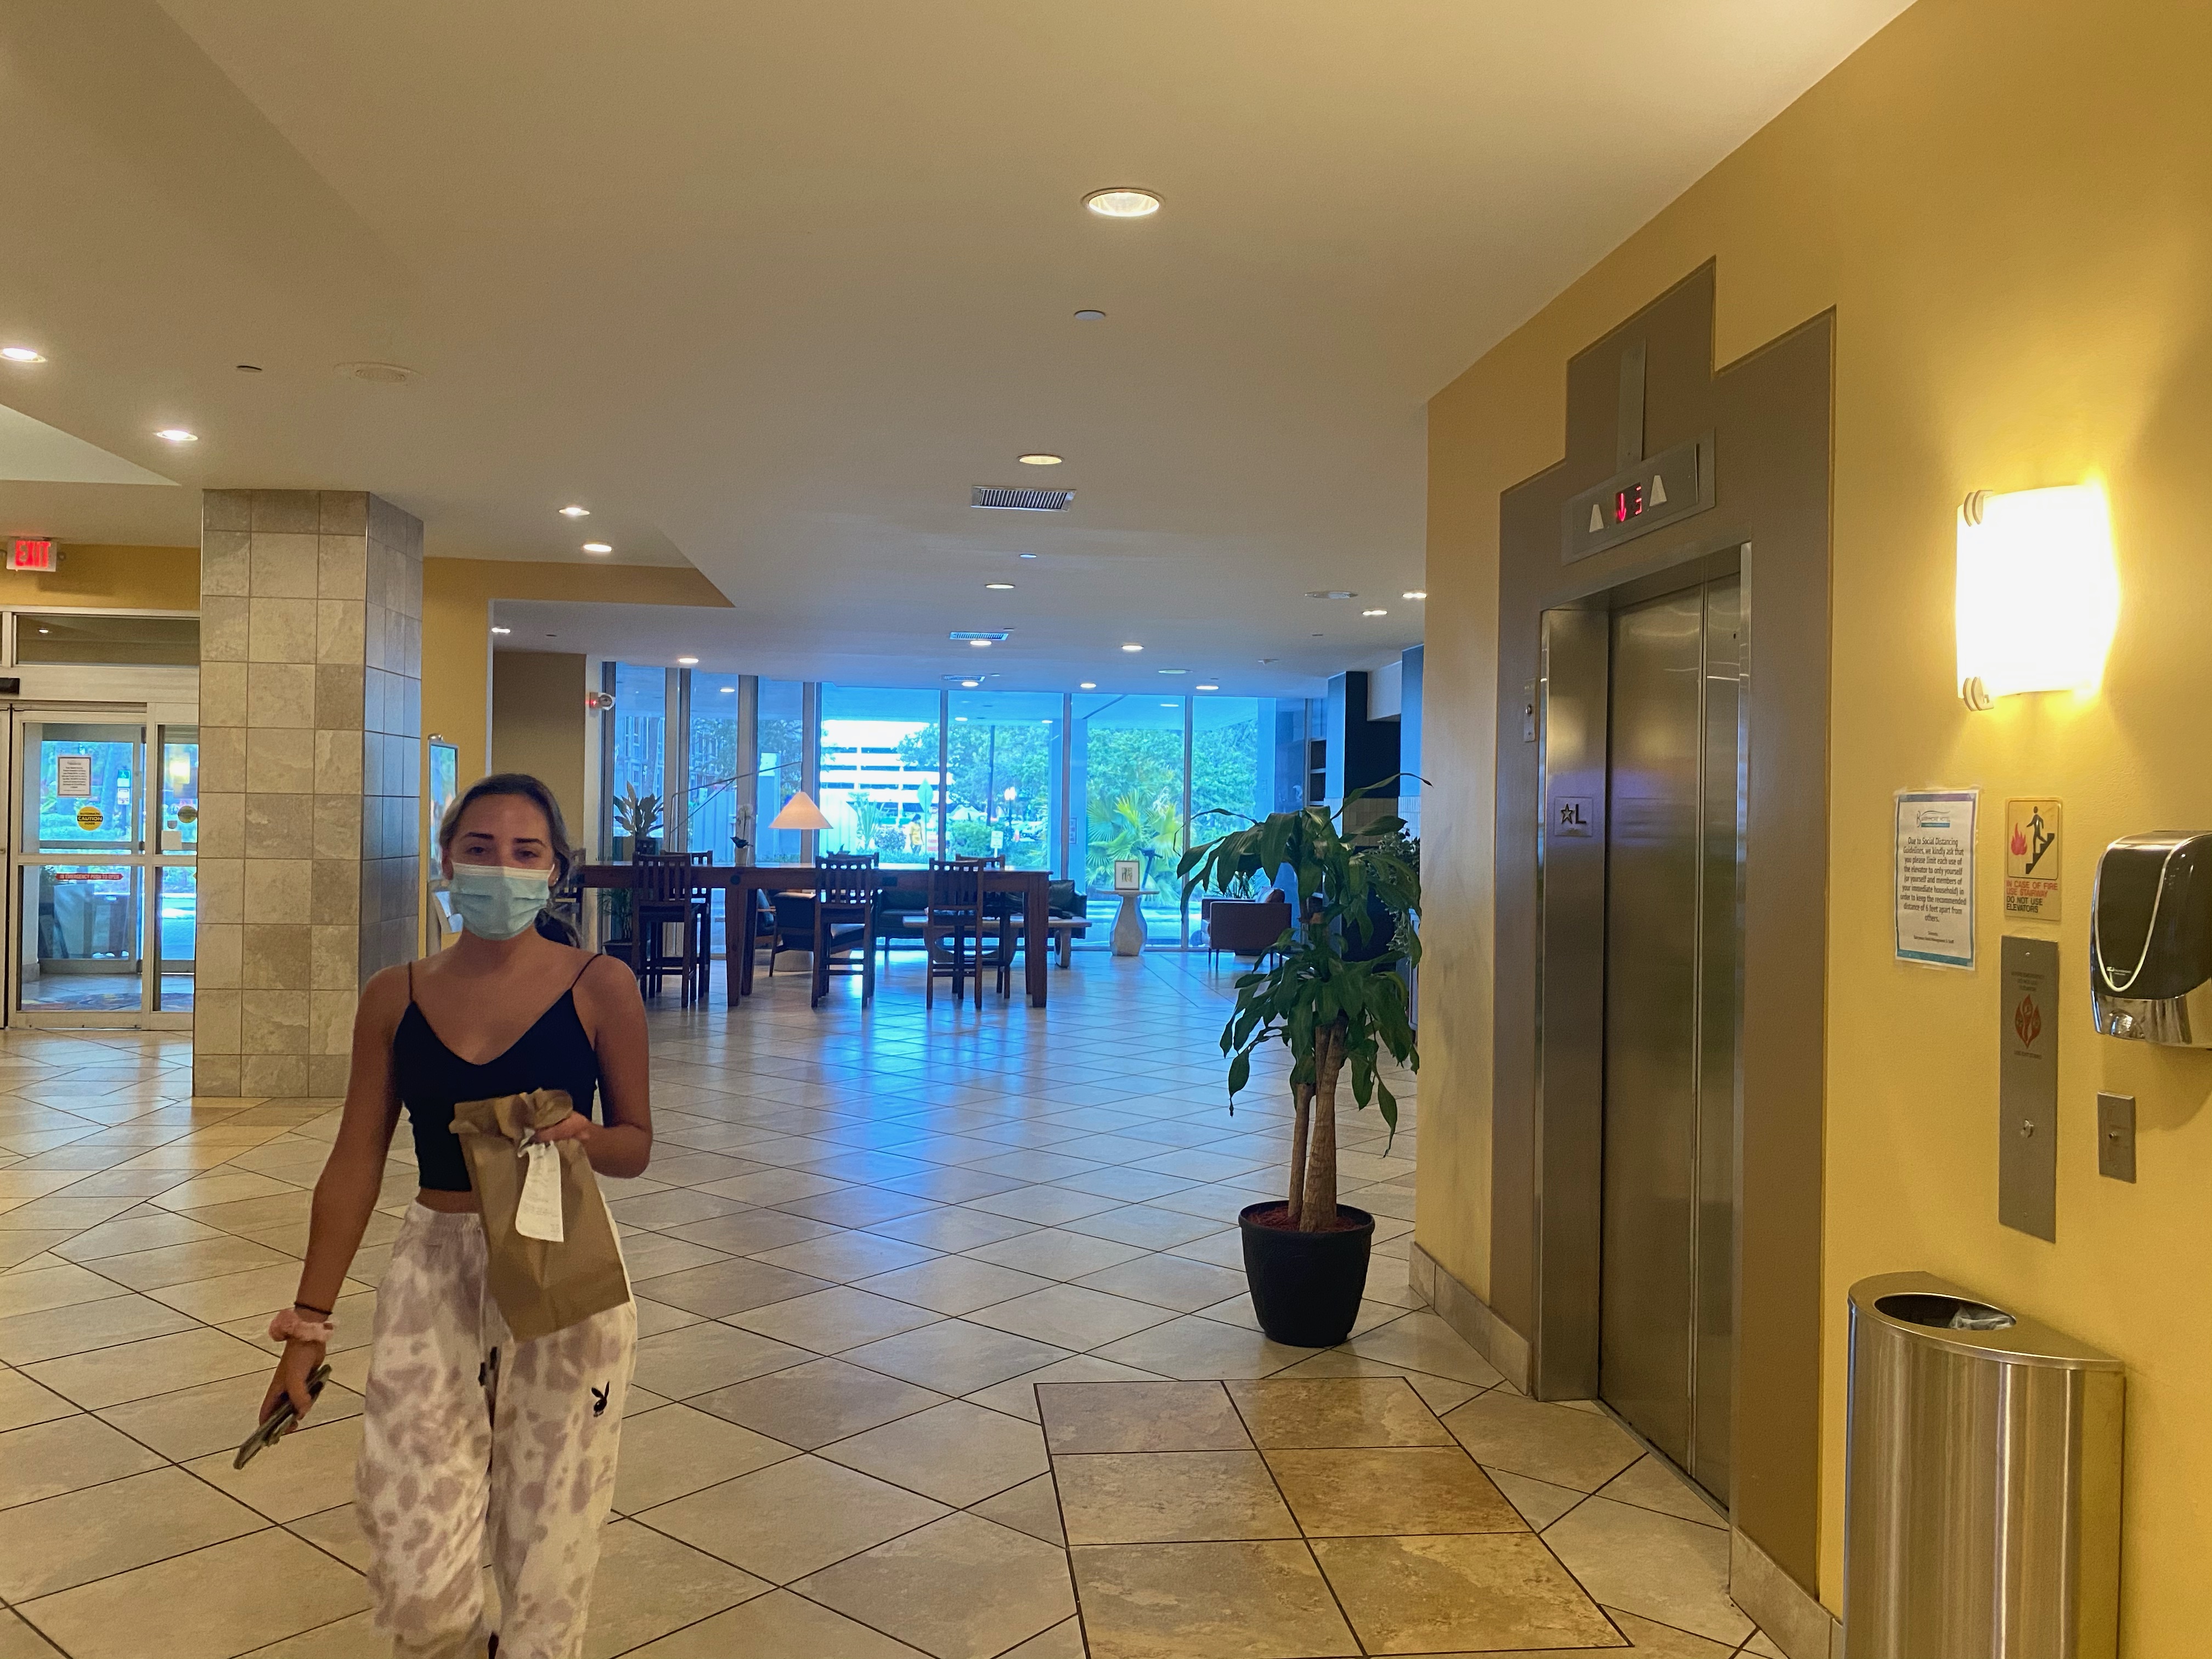 Barrymore Guests Unaware of Students Quarantining